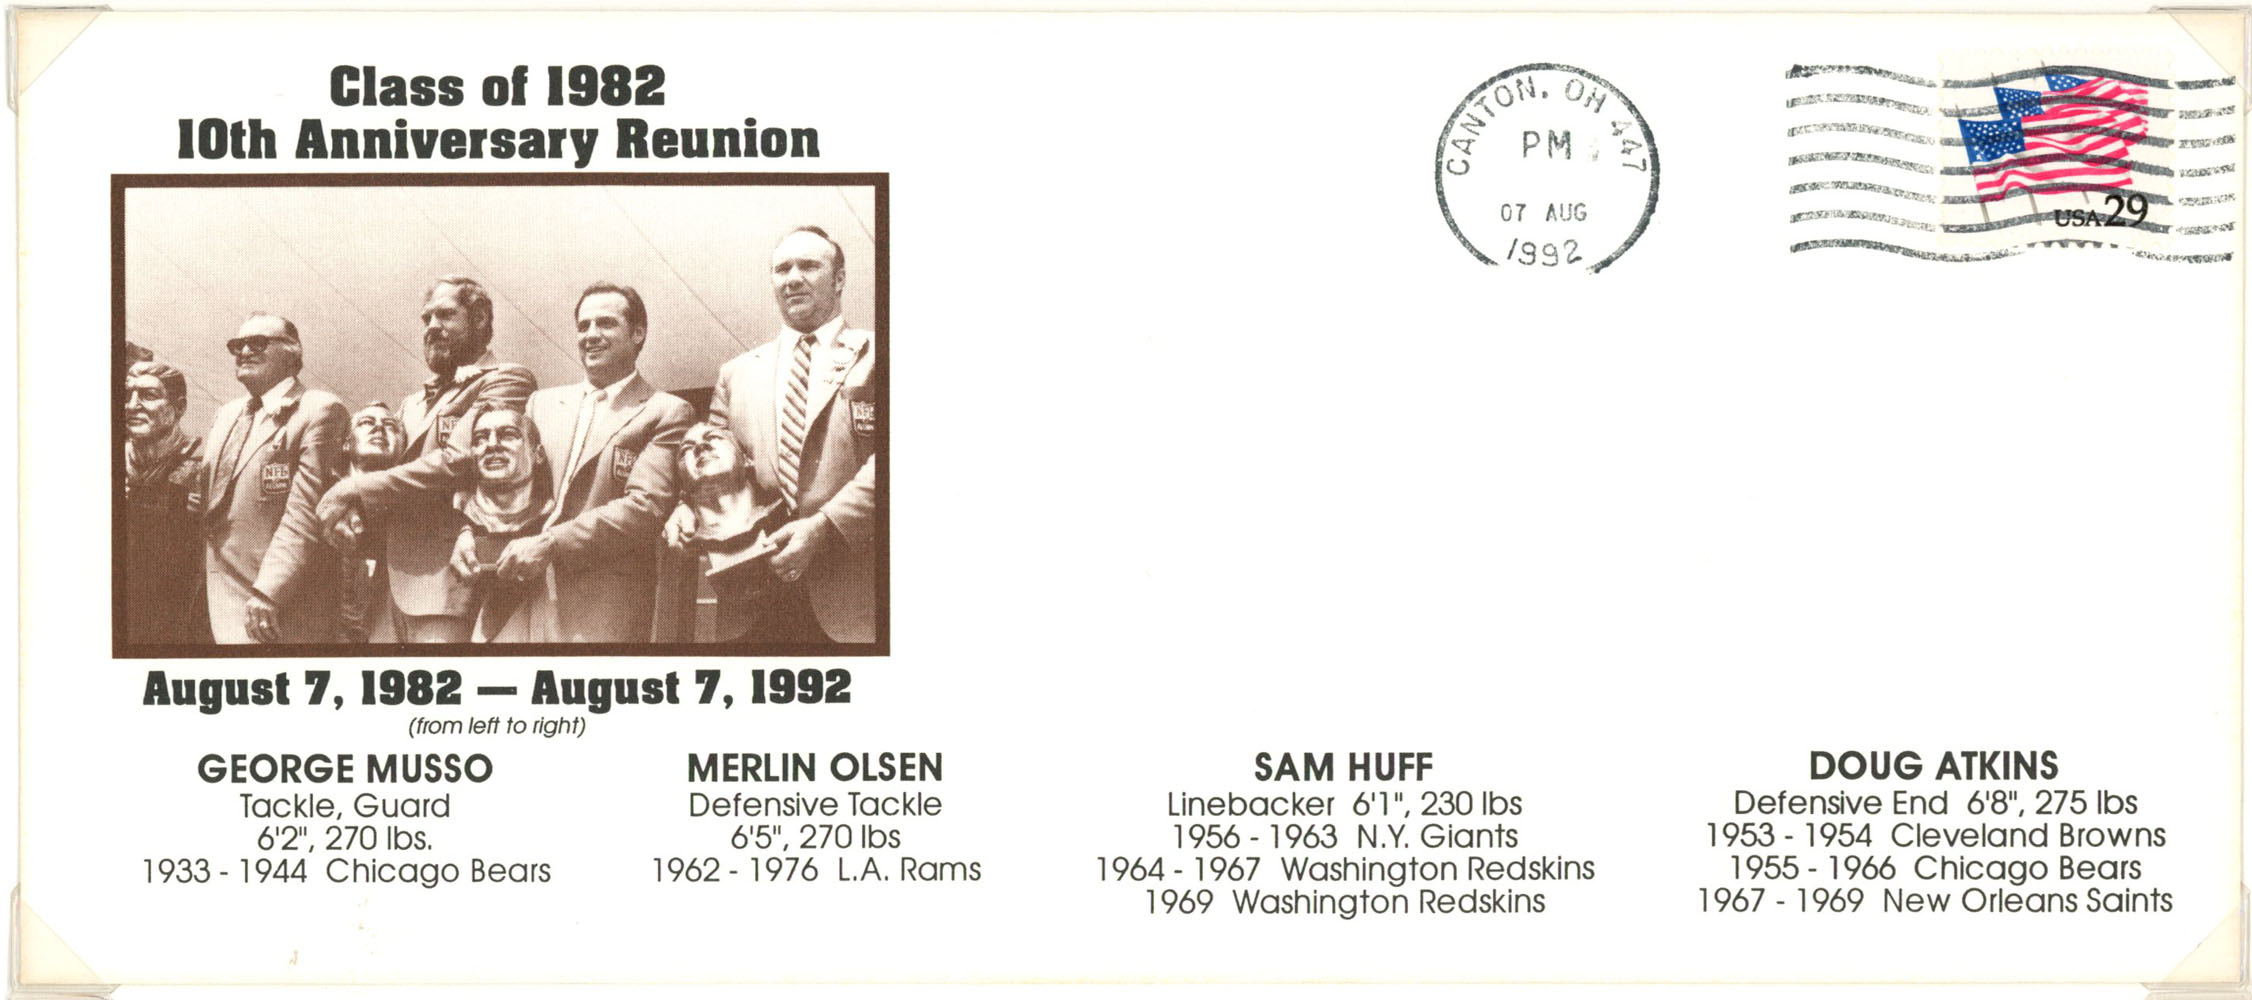 Class of 1982 10th Anniversary Reunion Hall of Fame Cachet Envelope